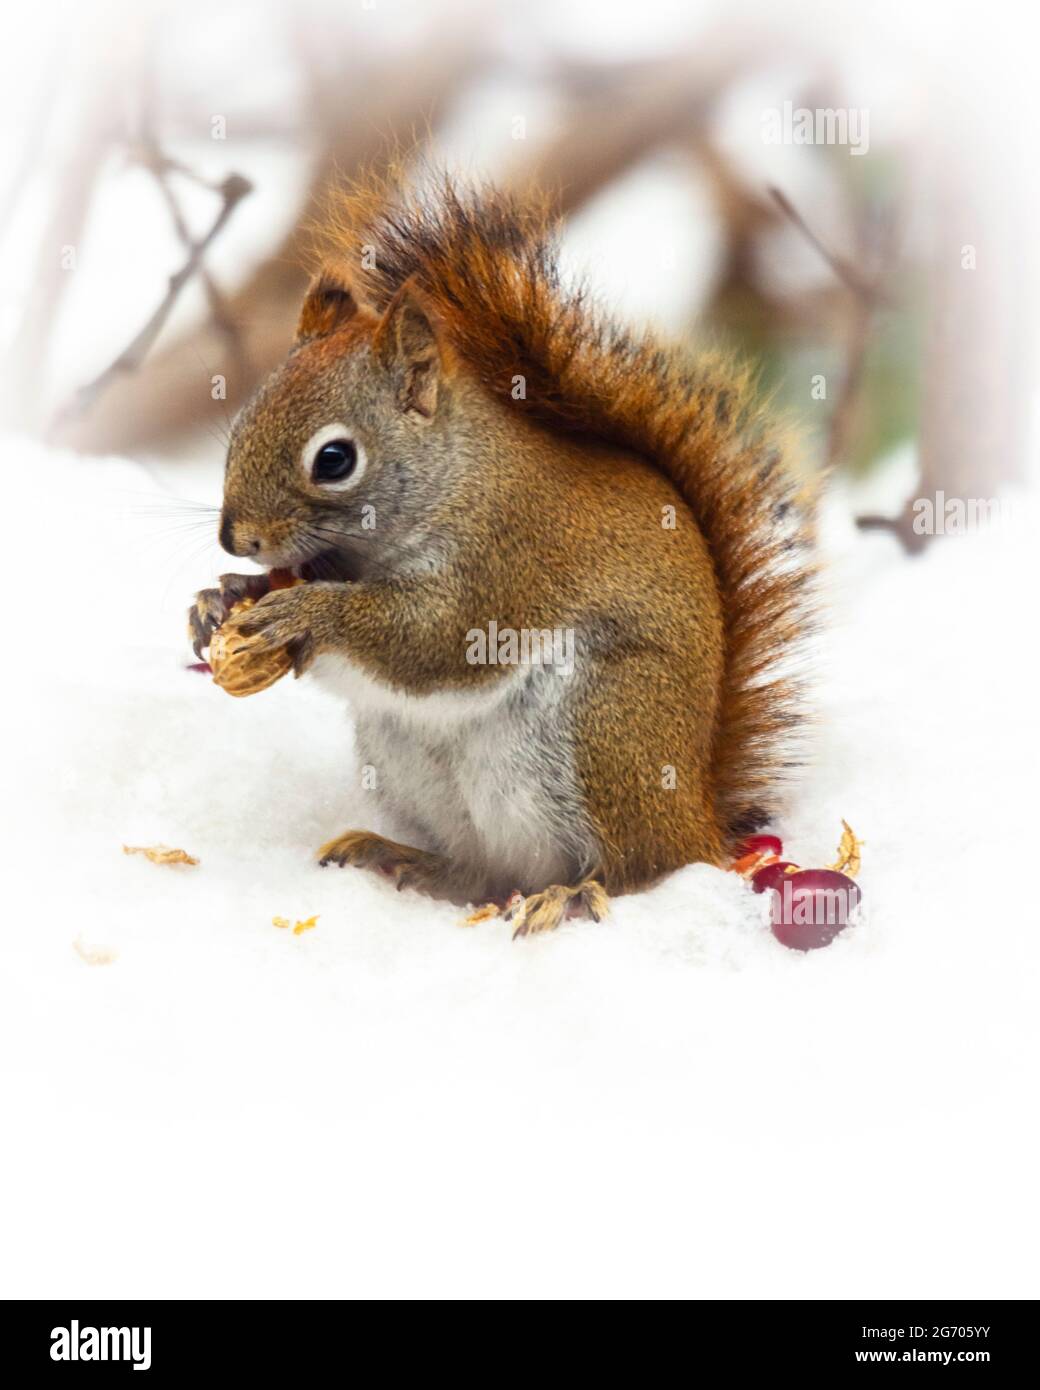 A red squirrel sits on newly fallen snow to eat a peanut during a Wisconsin winter. Stock Photo